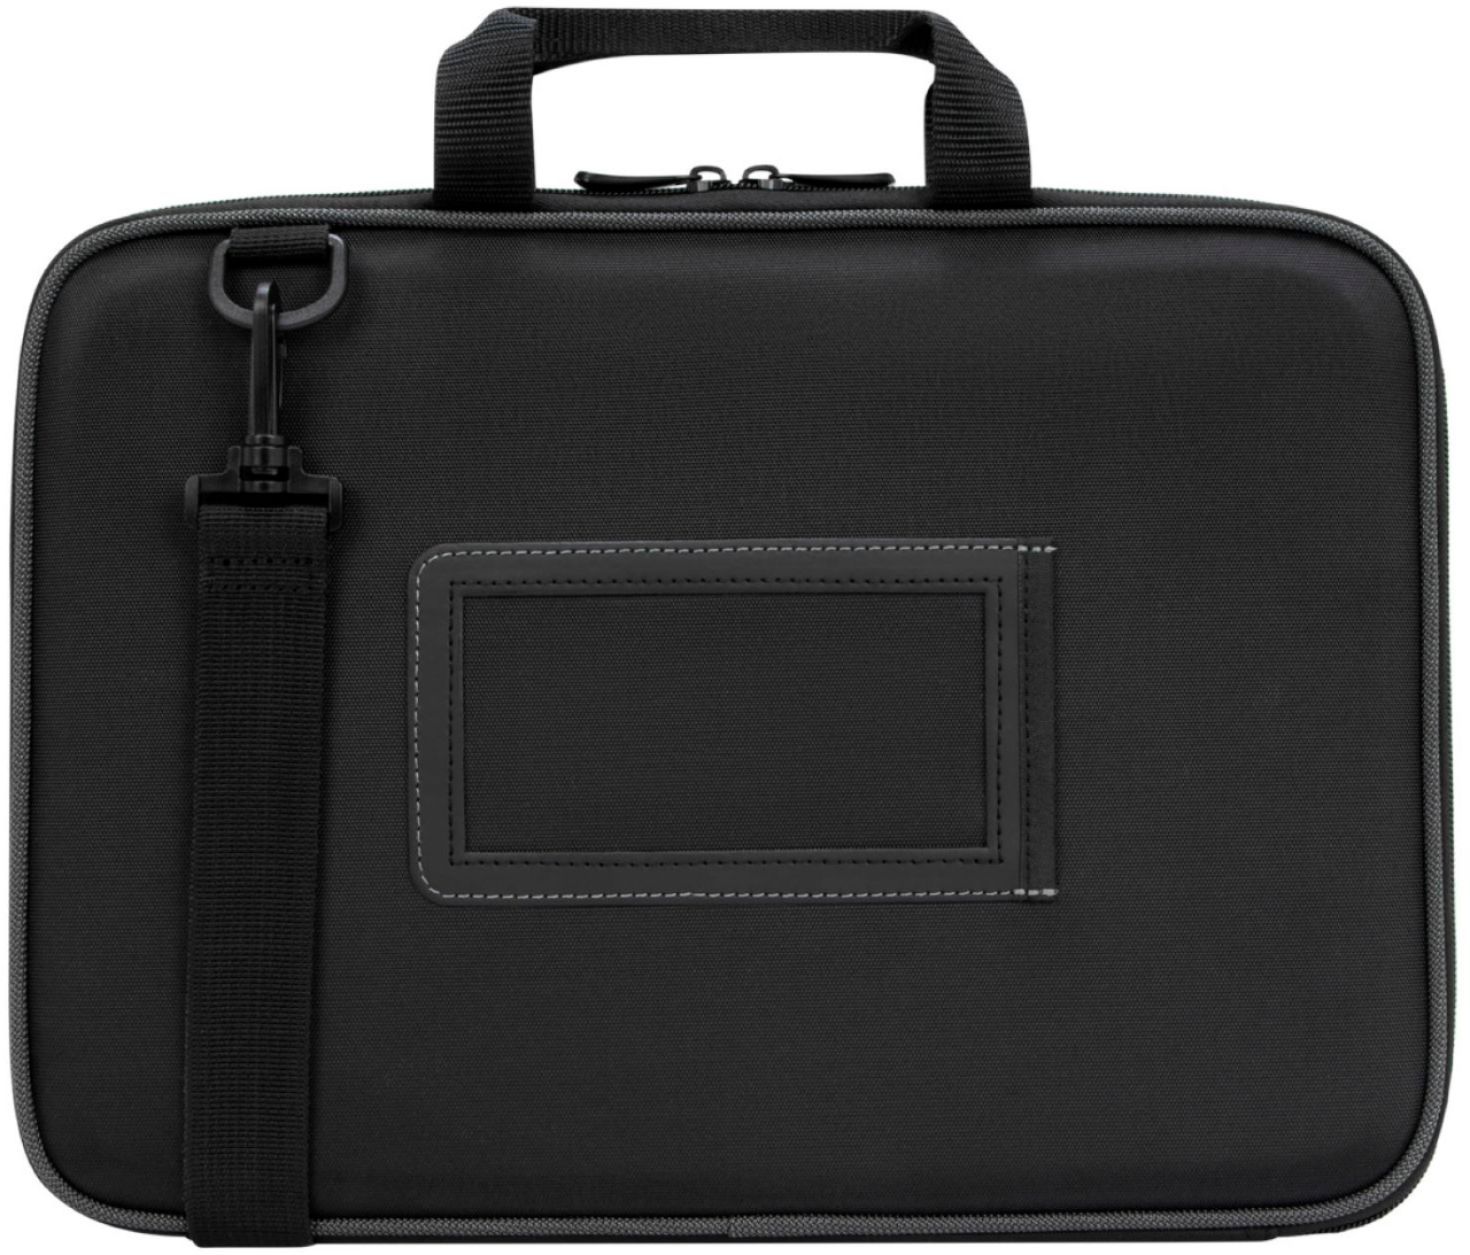 Back View: Samsonite - Classic Business 2.0 2 Comp. Brief for 17" Laptop - Black